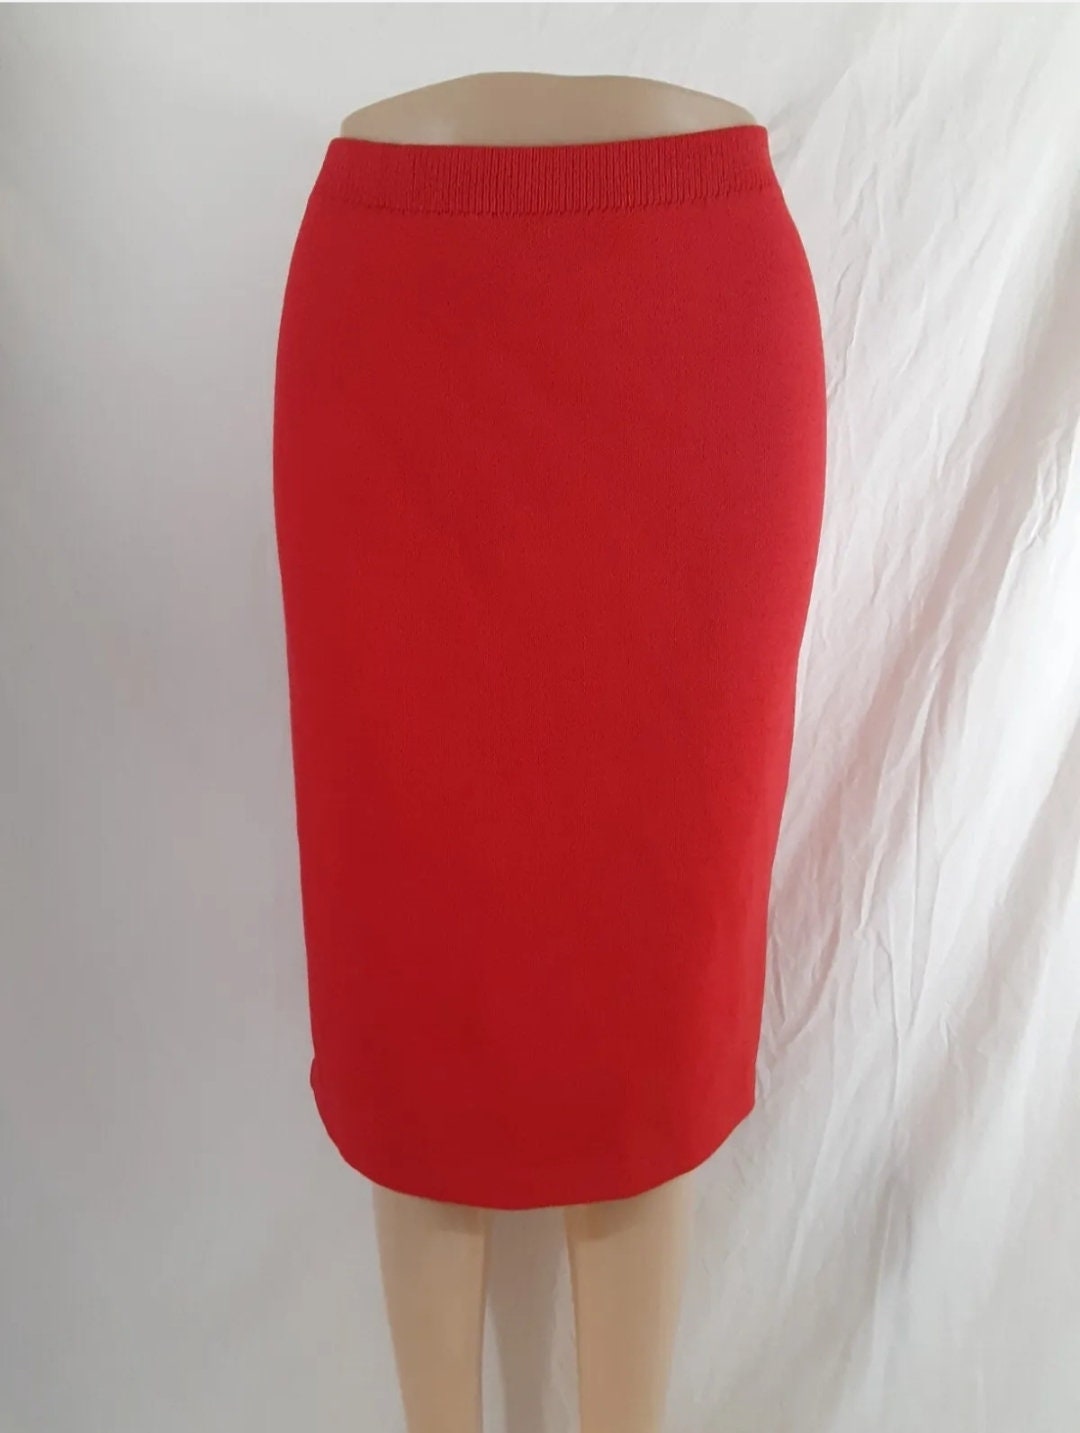 ST. JOHN Collection by Marie Gray Santana Knit Skirt Red - Etsy